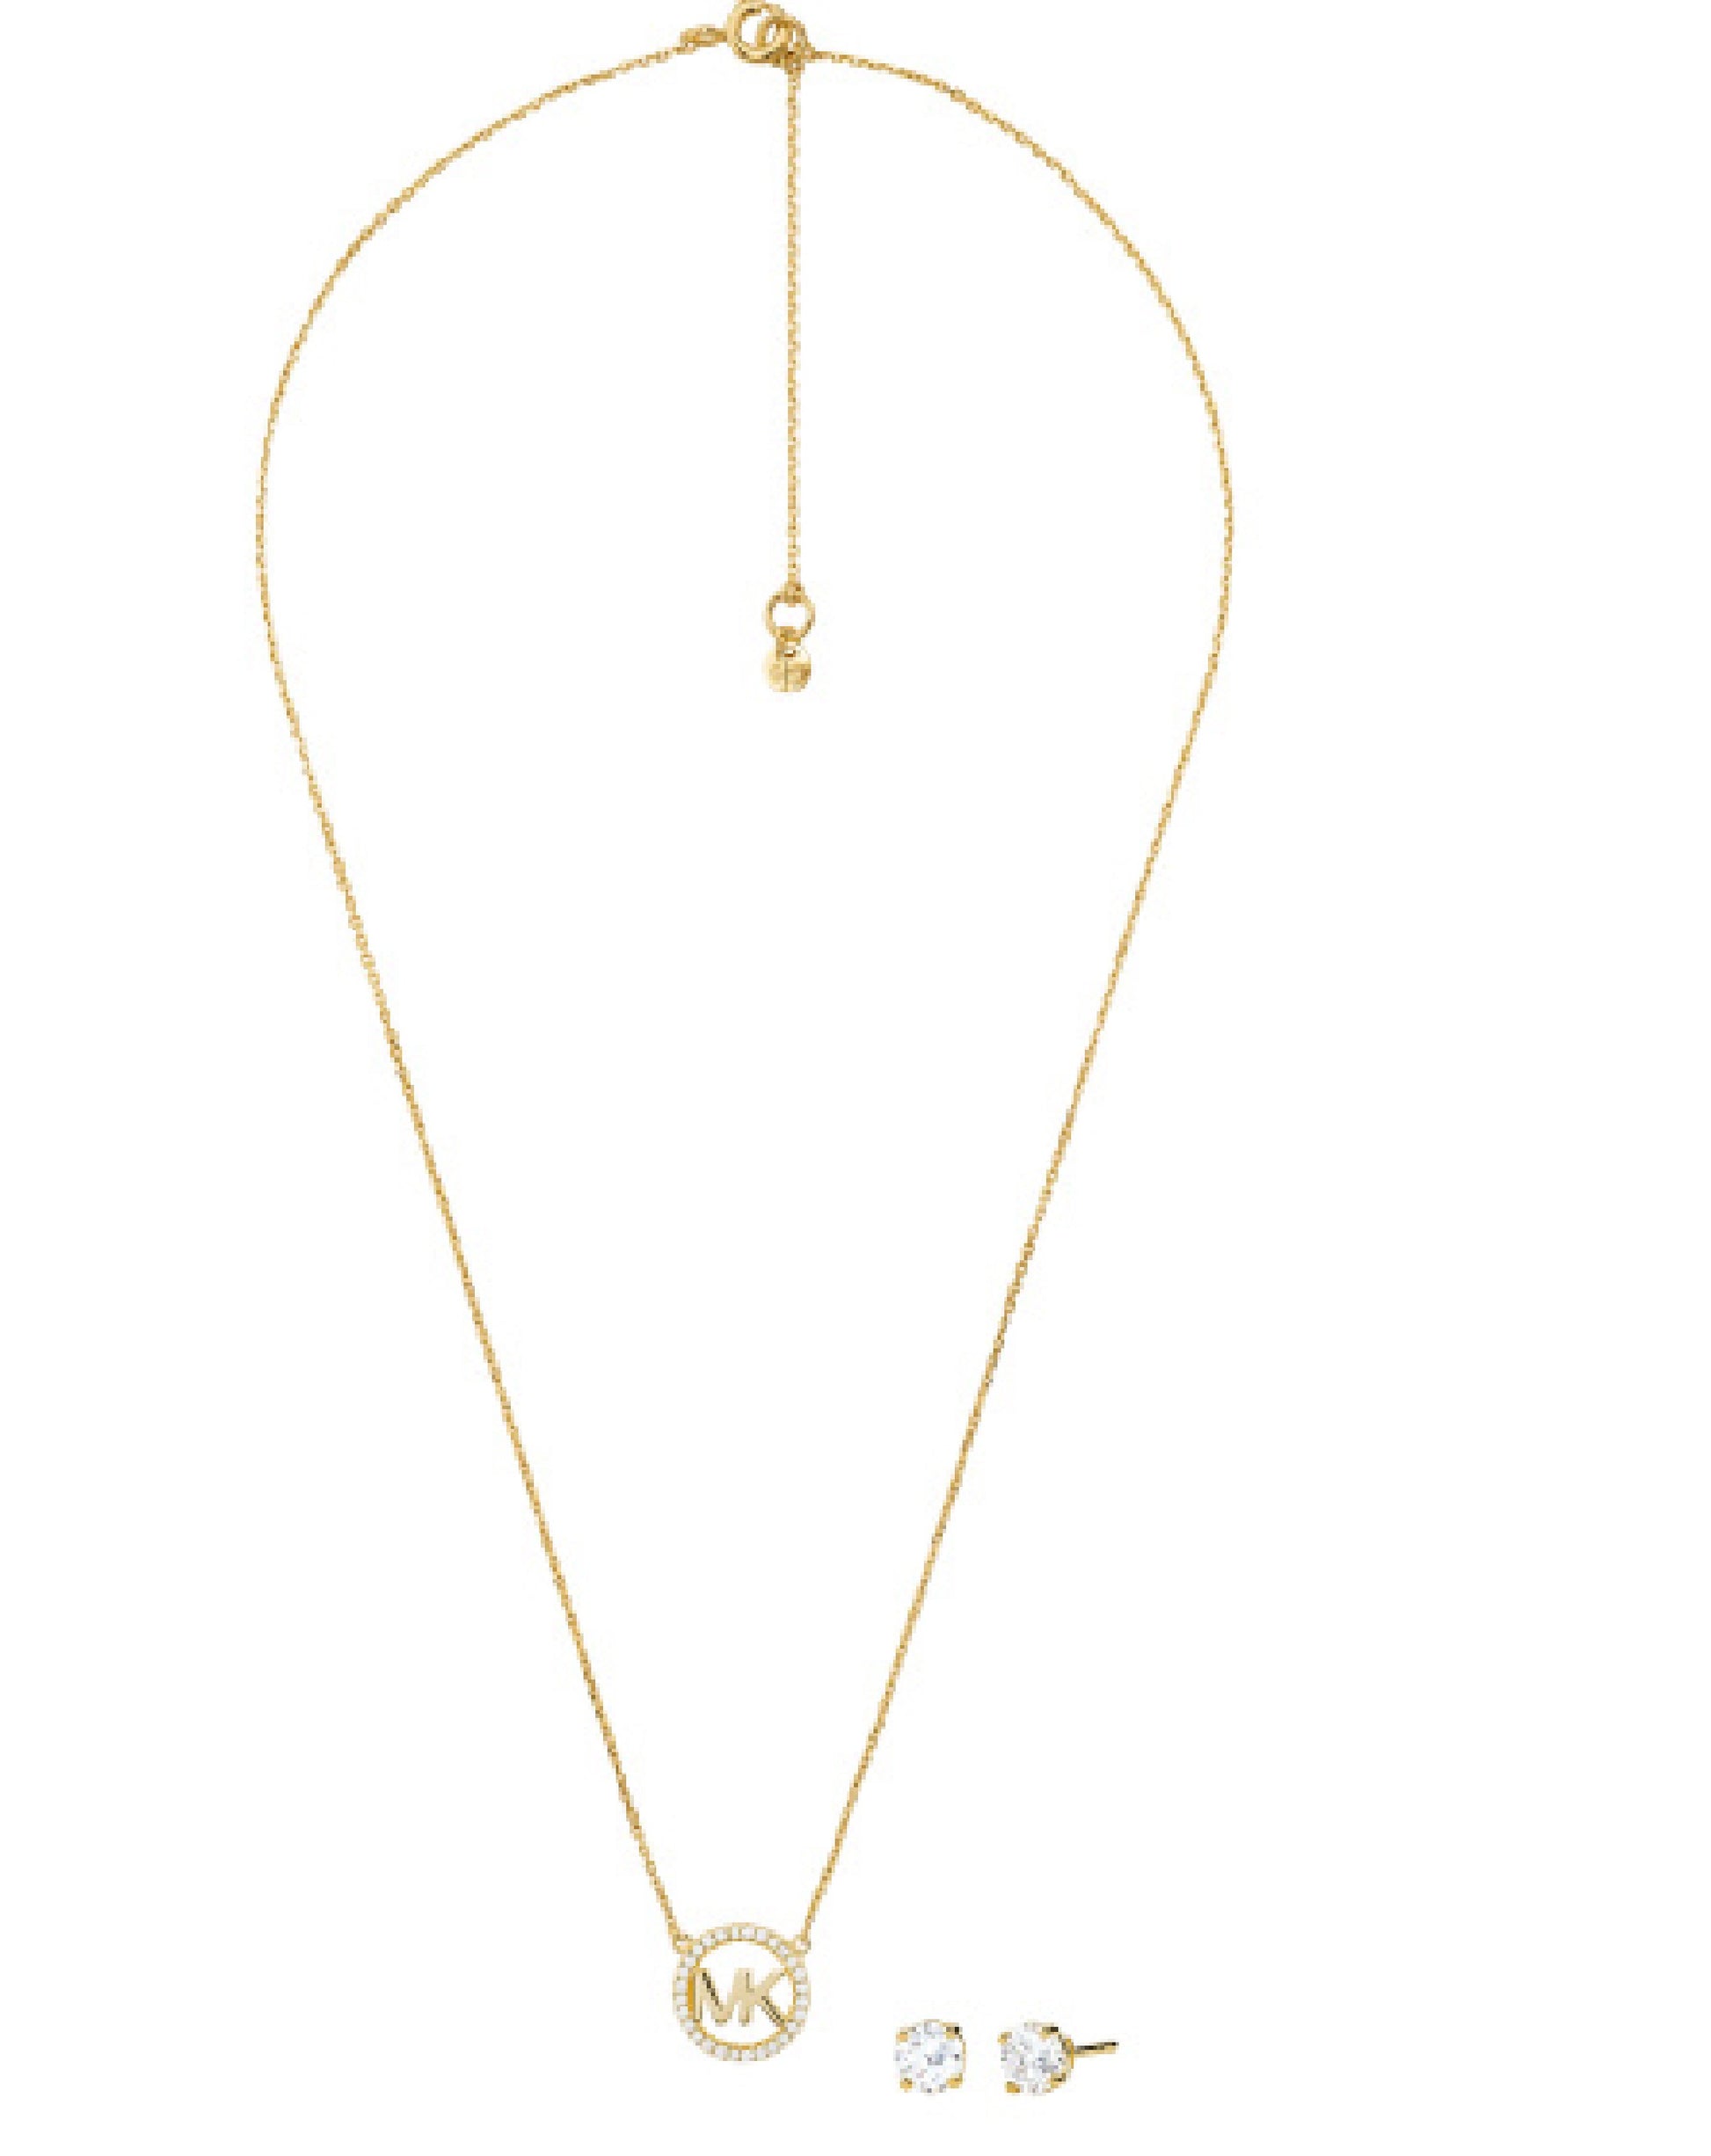 Michael Kors MKC1260AN710 Michael Kors Yellow Gold Tone Necklace & Earring Necklaces